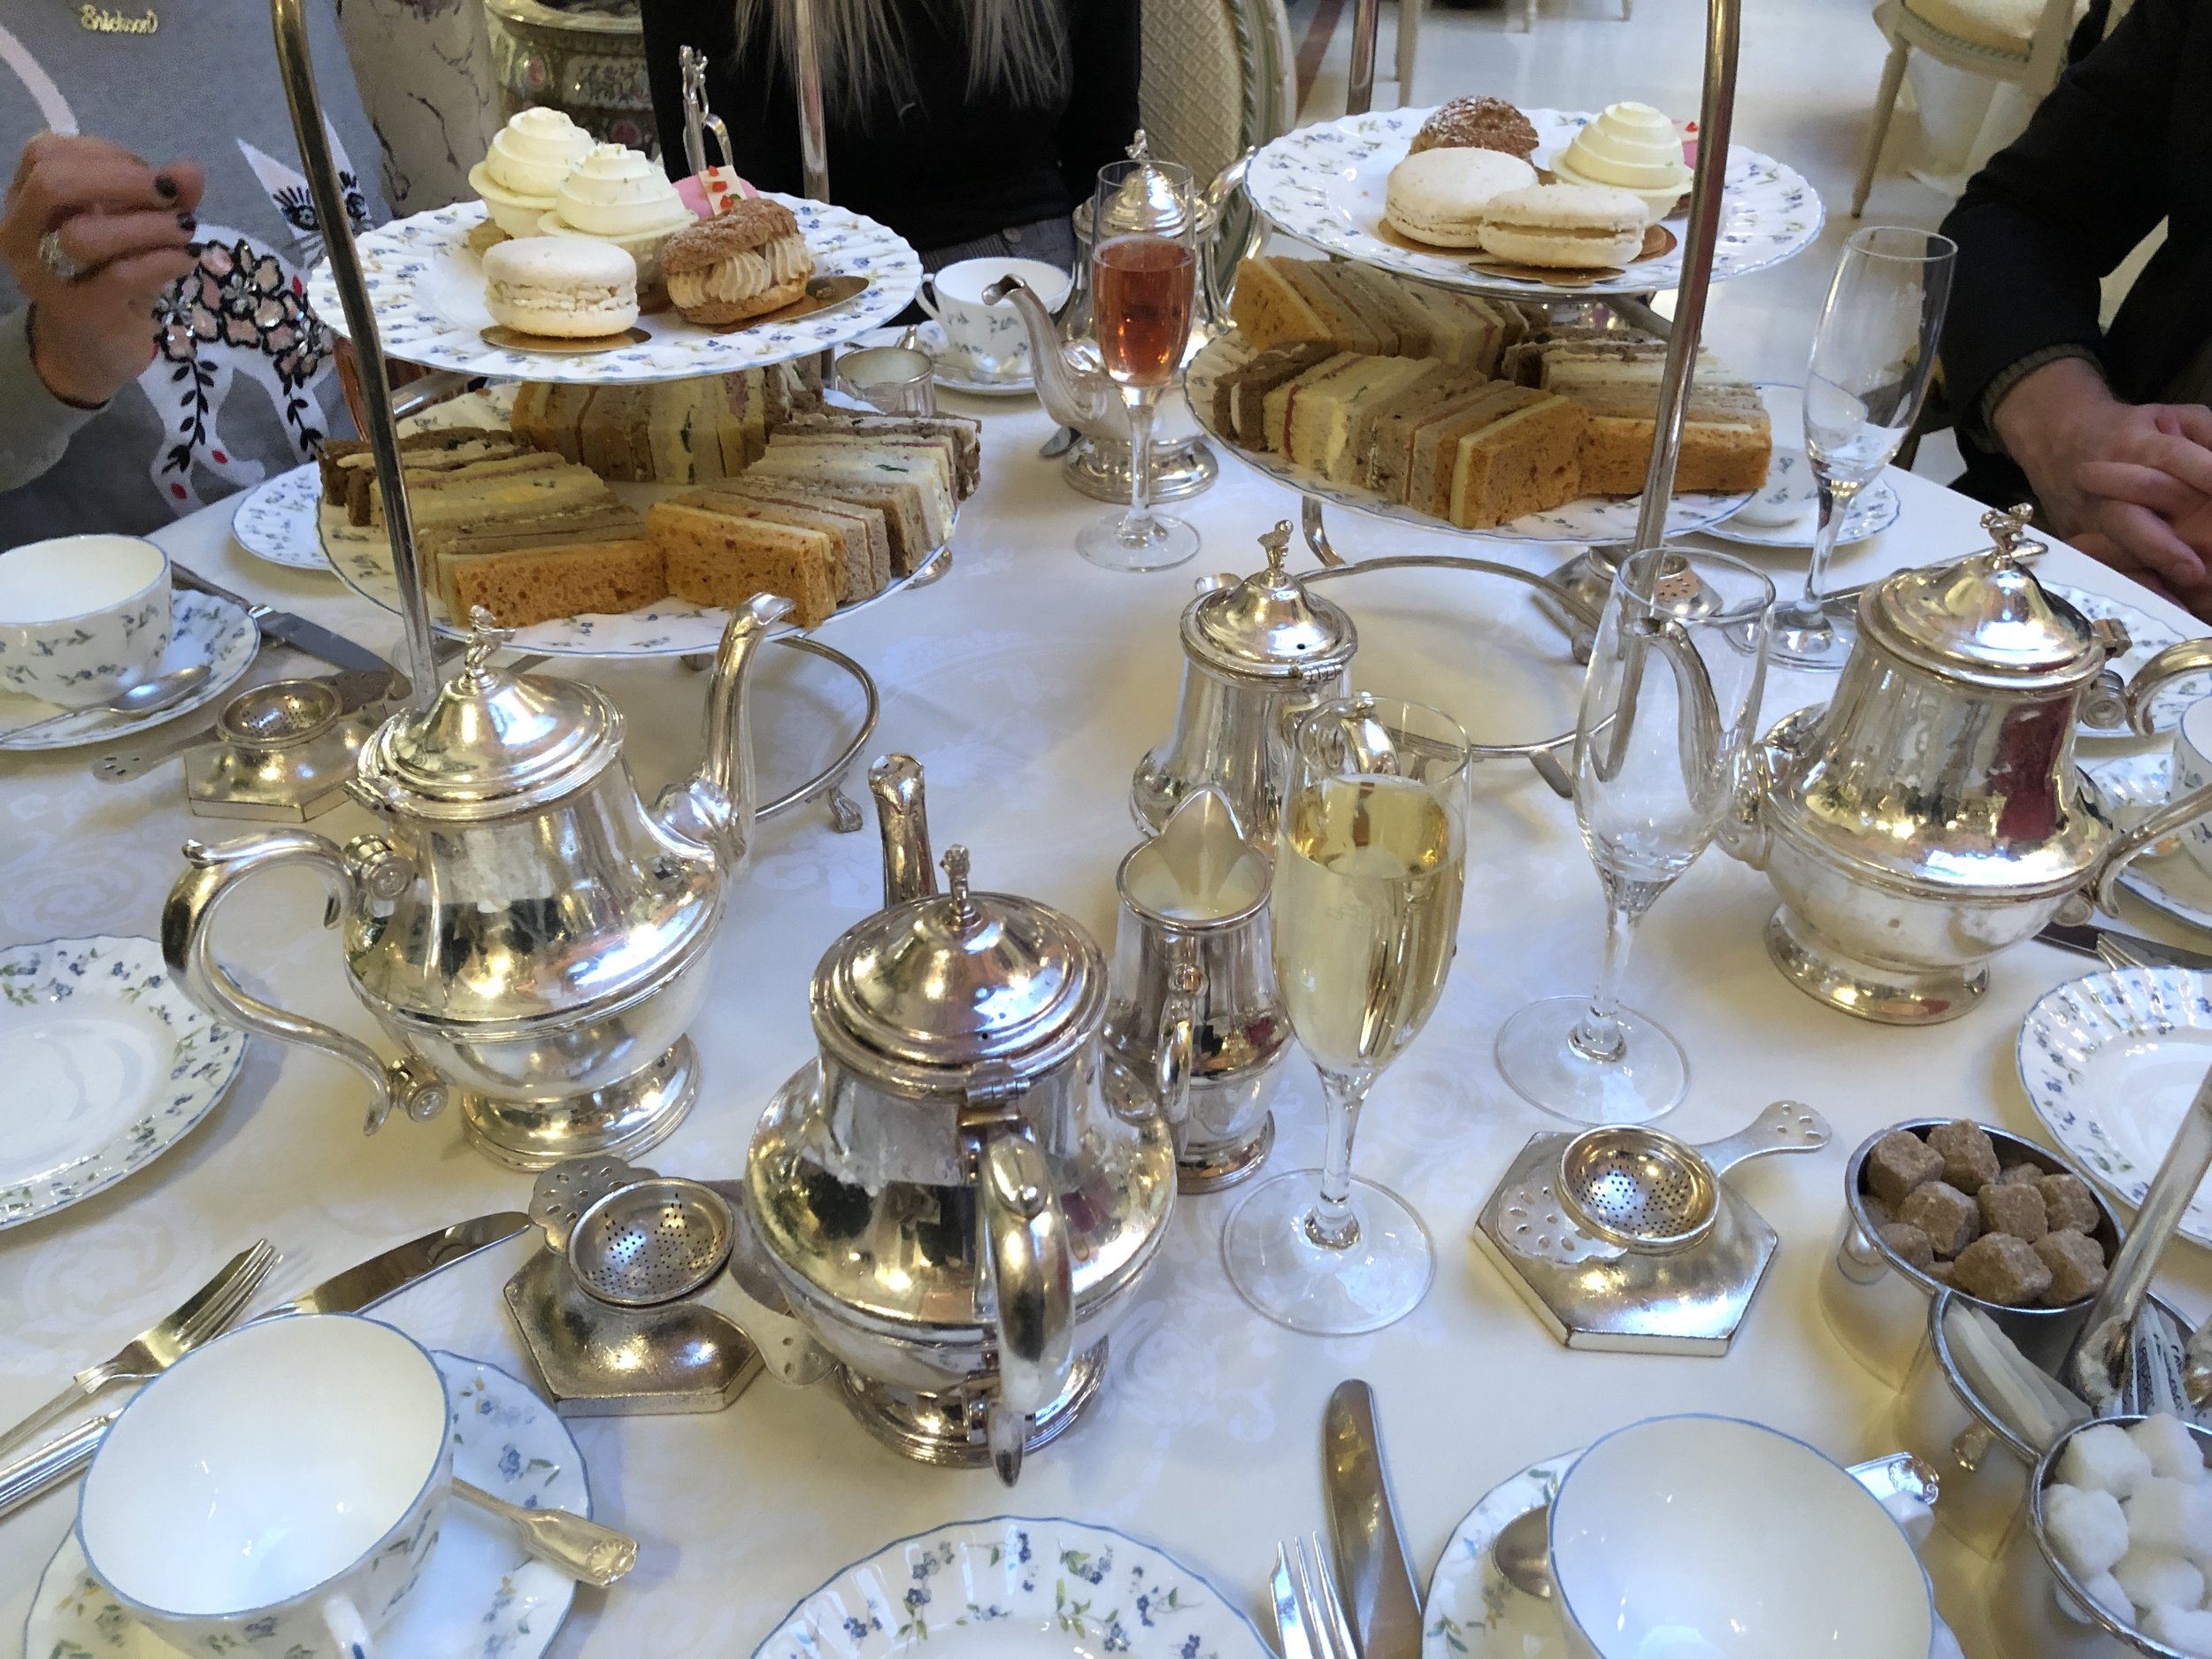 Afternoon tea at the Ritz in London, England